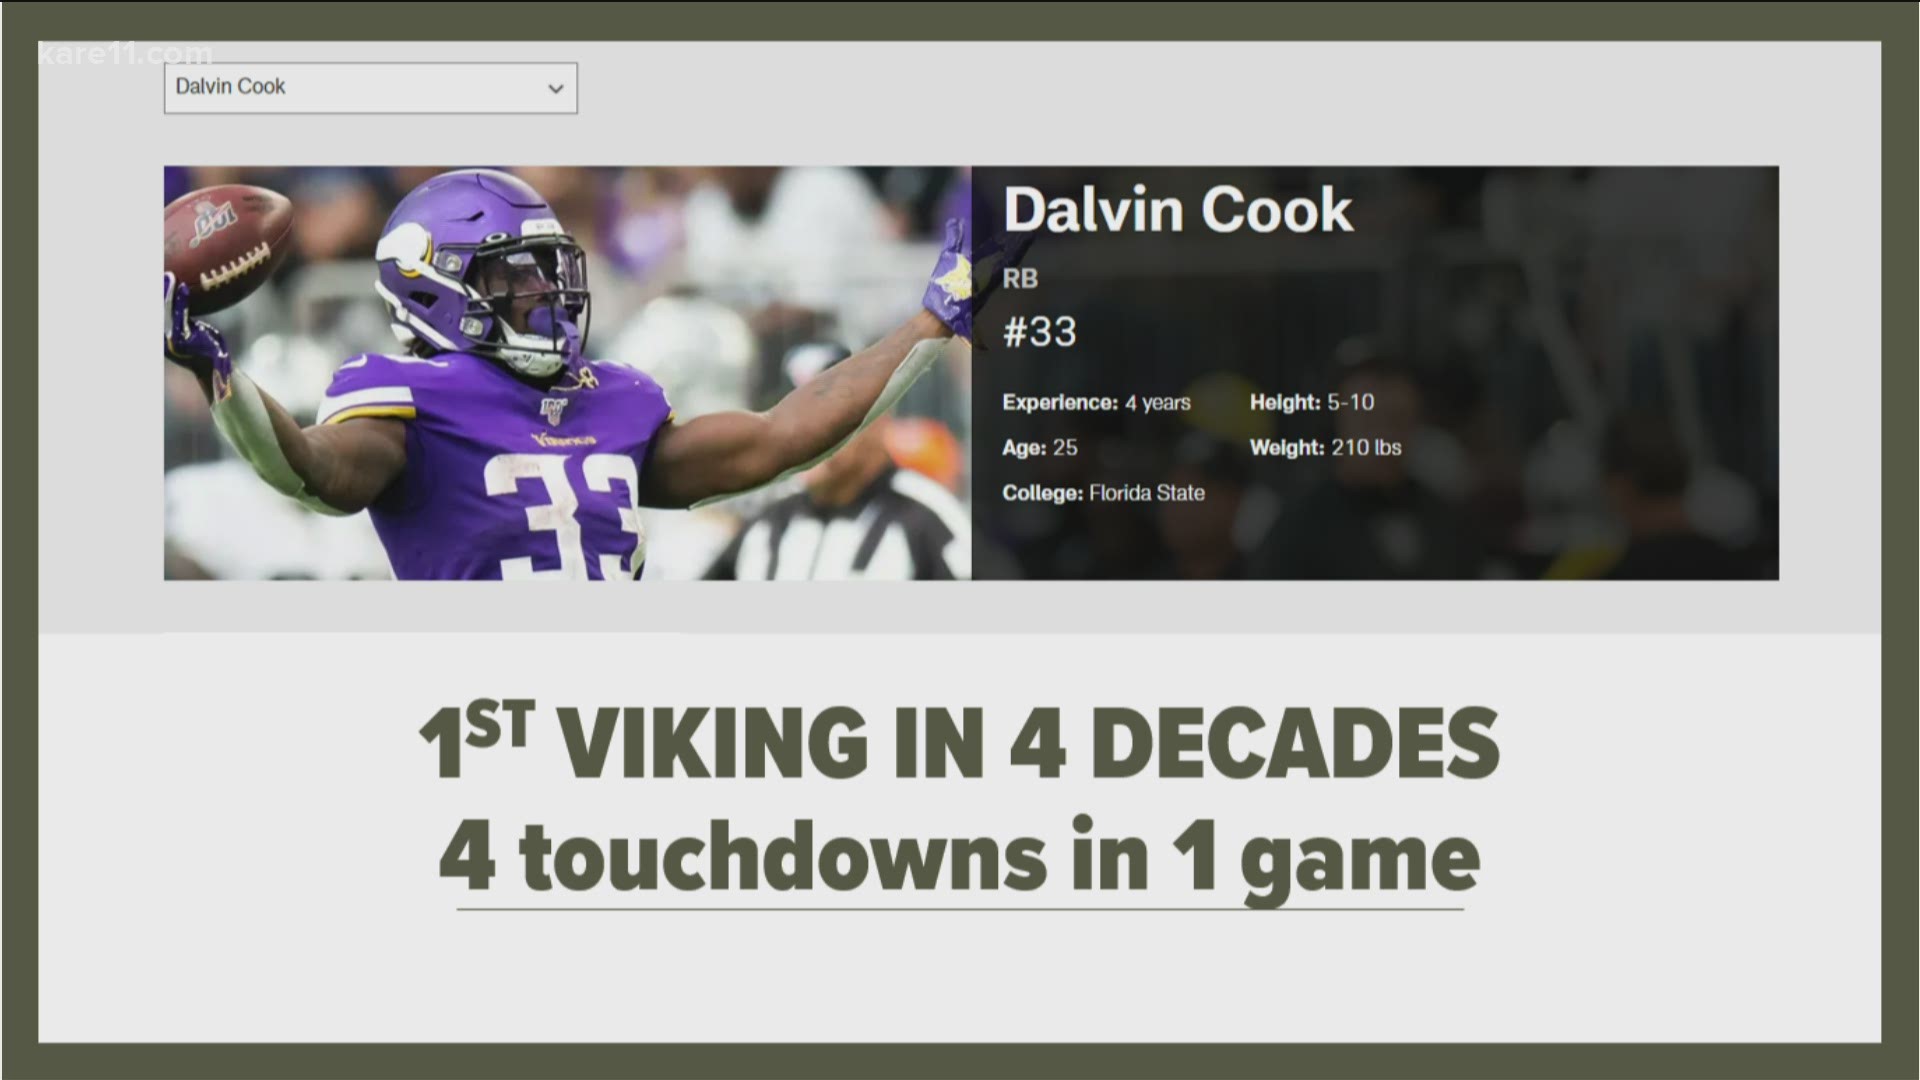 Dalvin Cook was a standout in Sunday's game